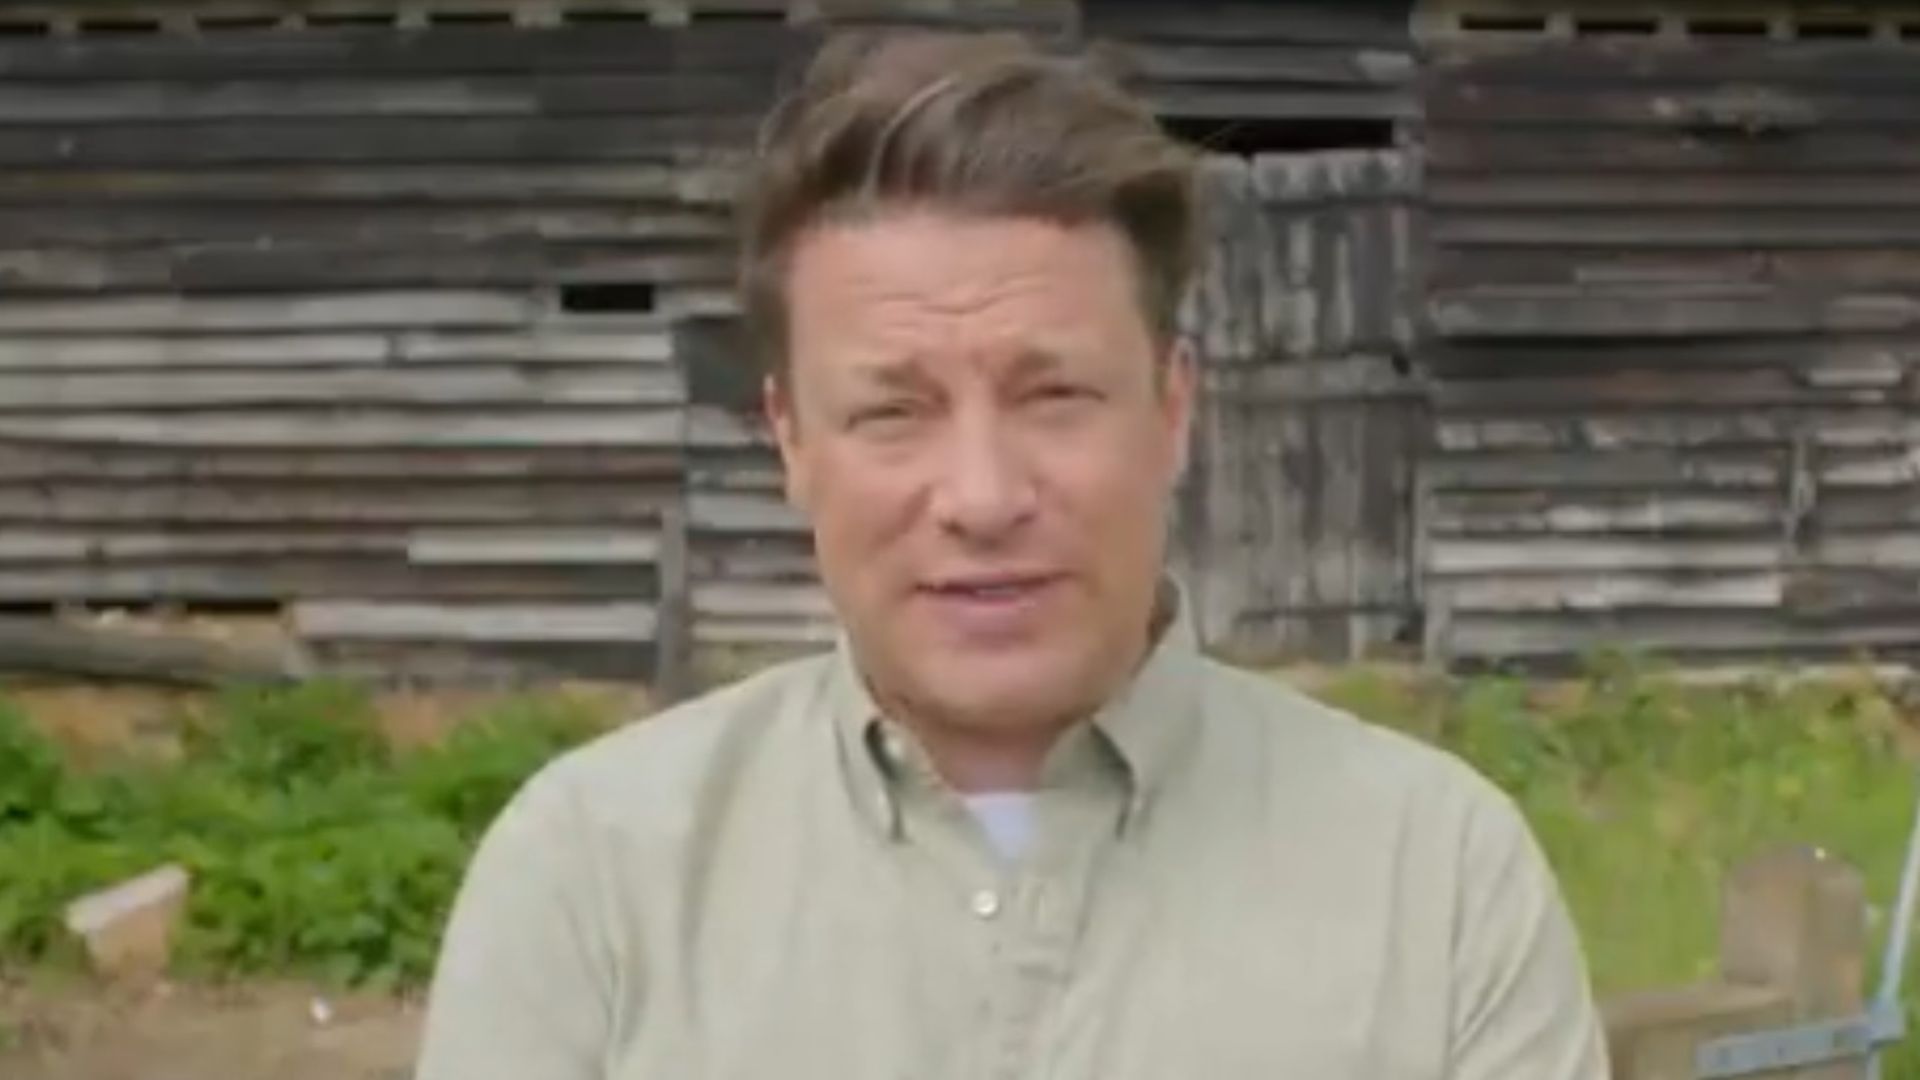 Television chef Jamie Oliver is taking action over post-Brexit food standards - Credit: Twitter